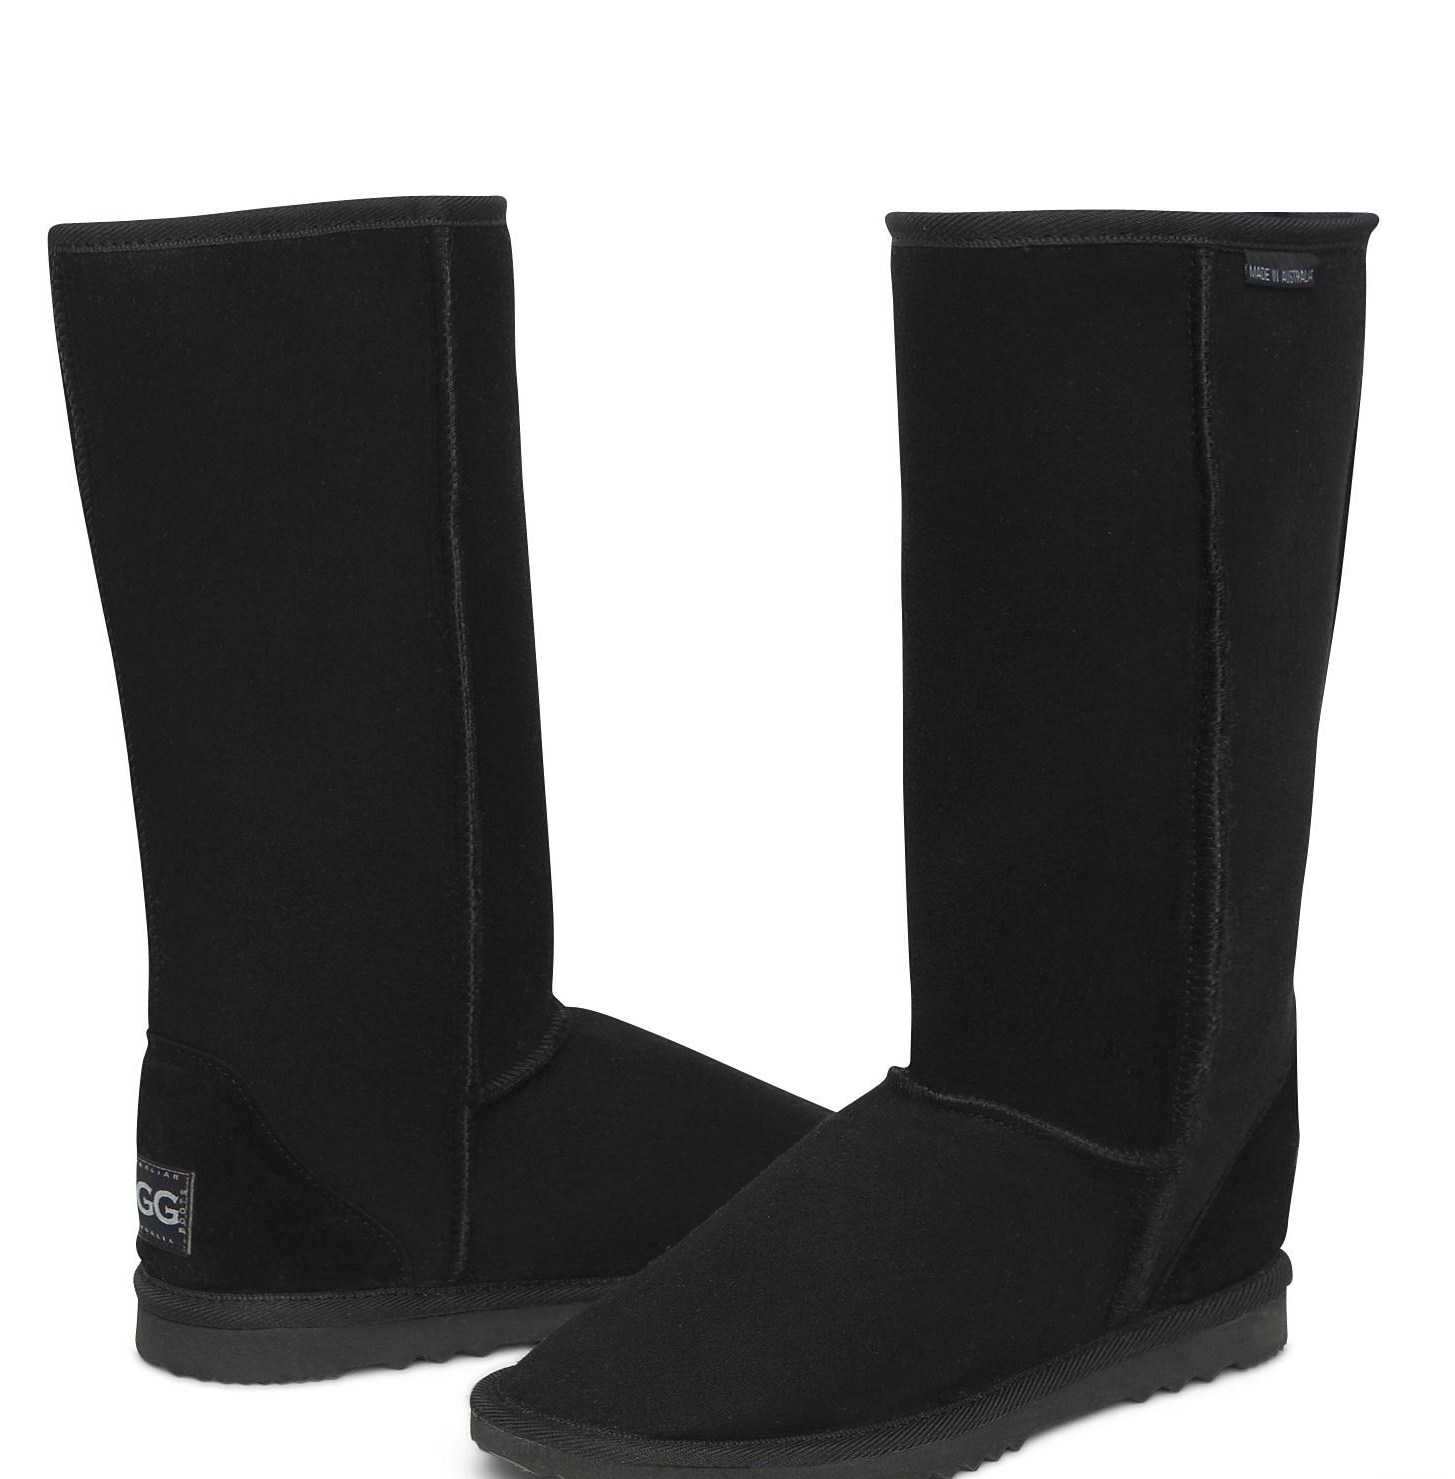 Men's Classic Tall Ugg Boots - Canberra Firewood